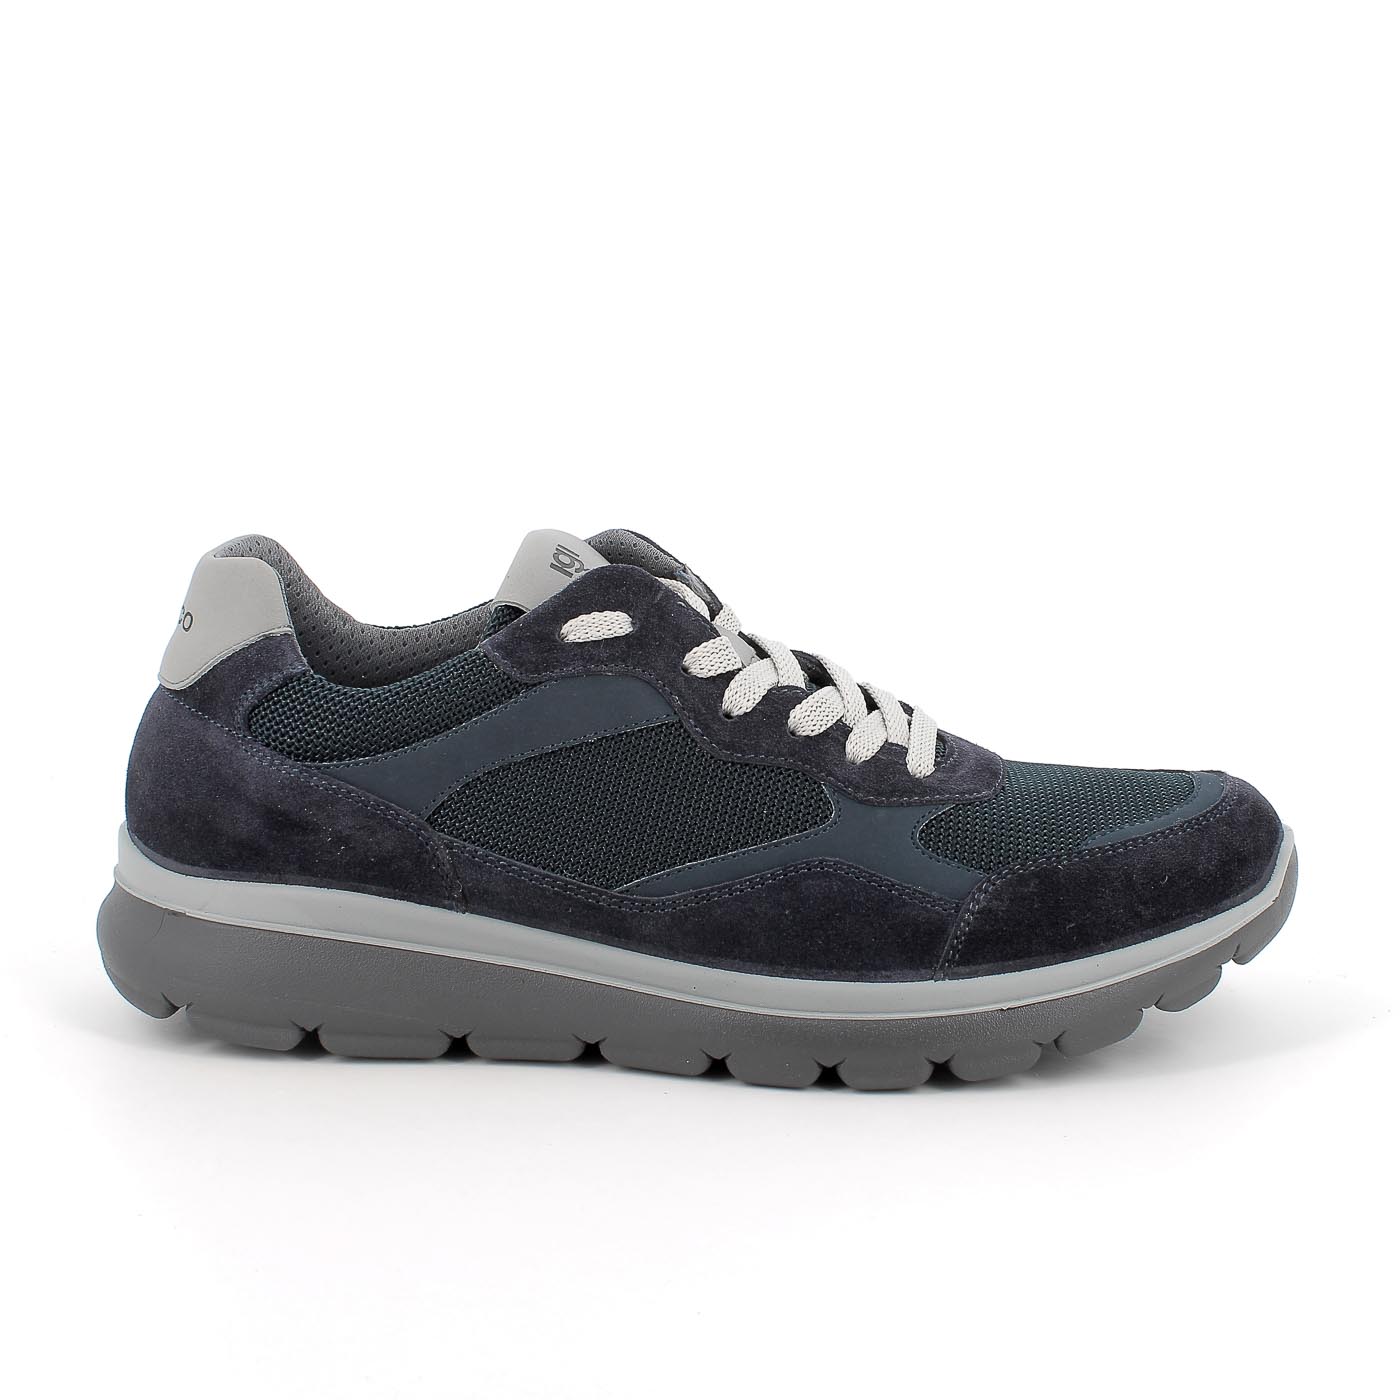 Igi & Co Men's Navy Leather-Textile Runner Shoes with Shock Absorbing Sole